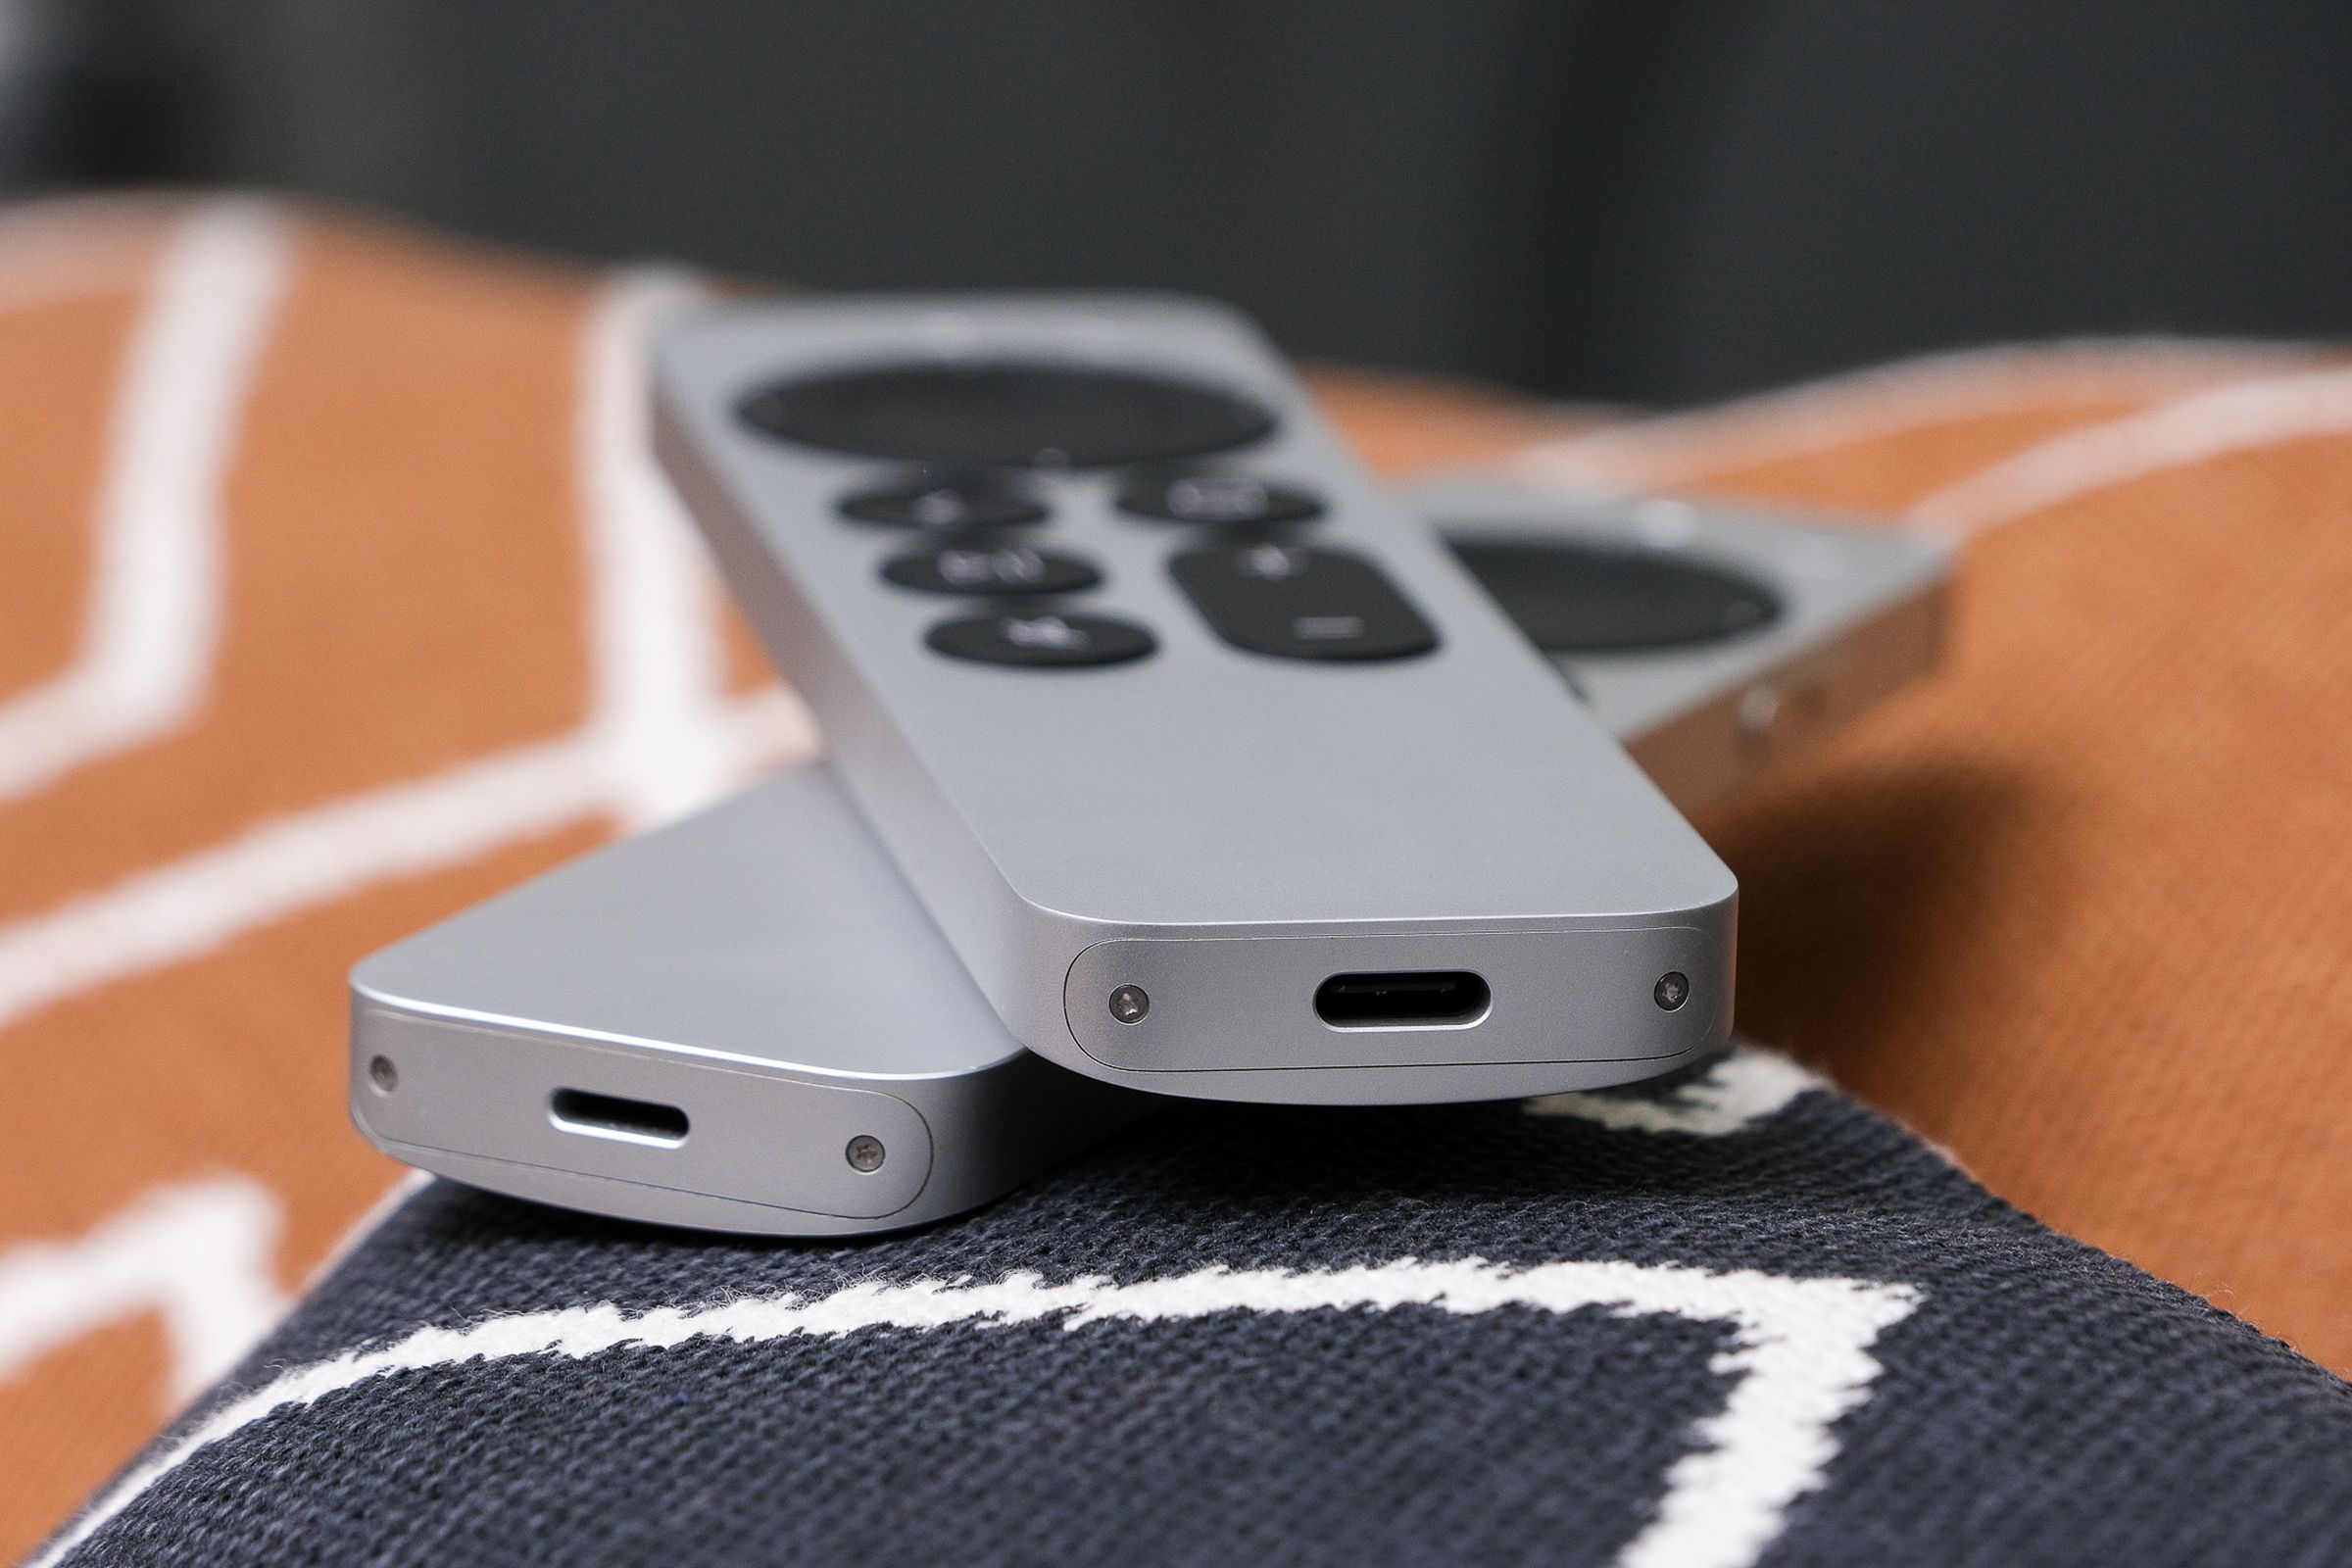 A photo of two Siri Remotes for the Apple TV. One has a Lightning port and the other has a USB-C port.